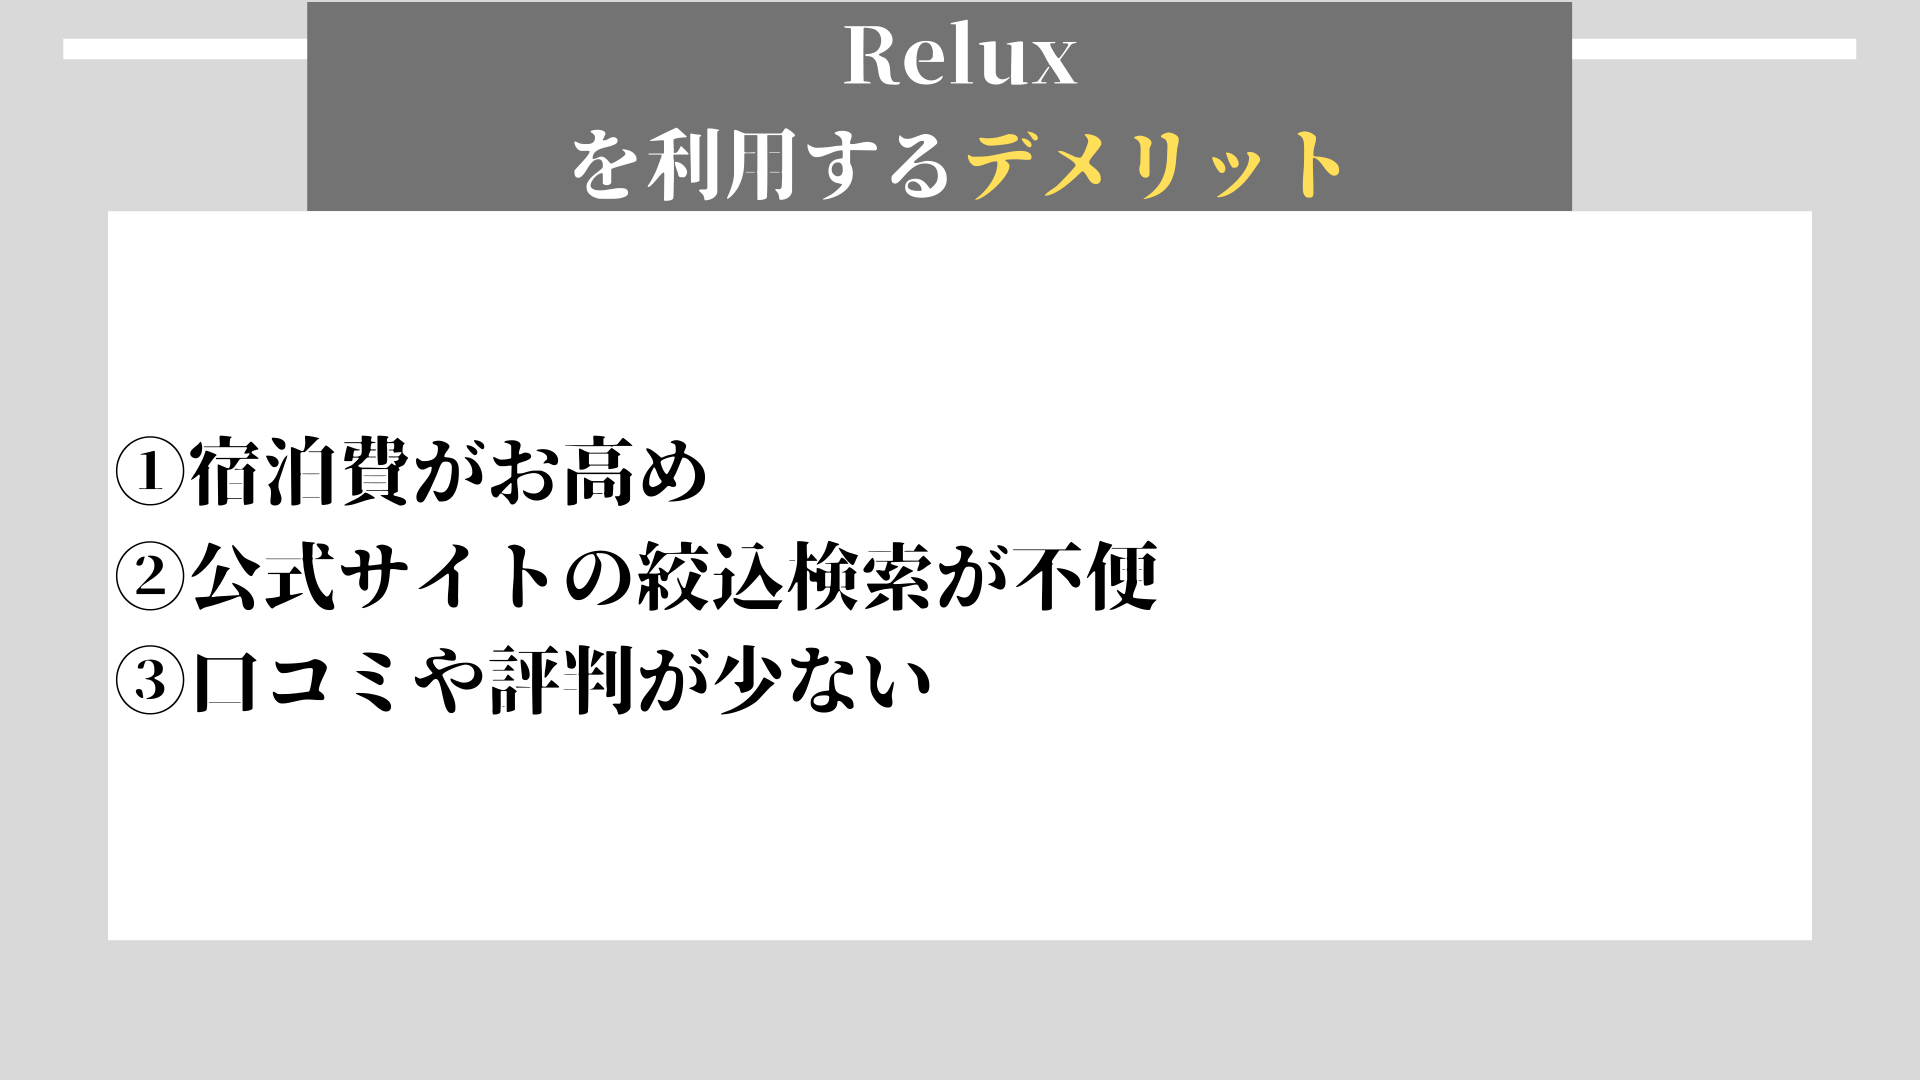 Relux　デメリット